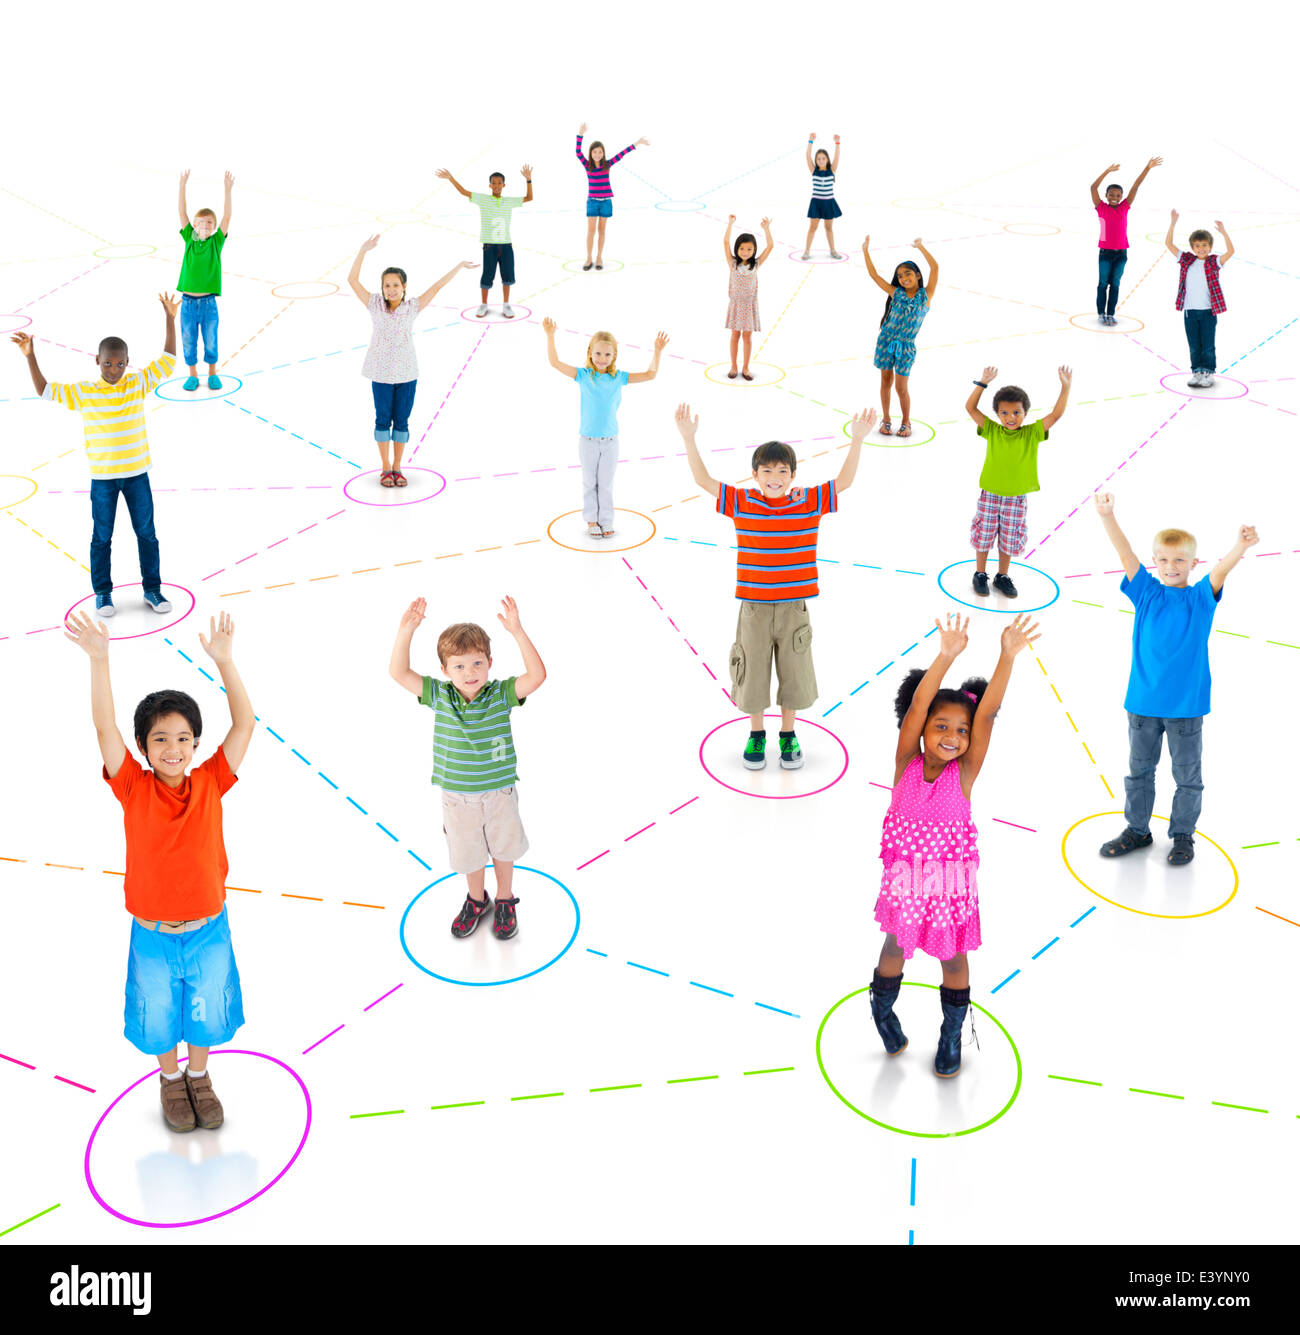 Connected Children With Their Arms Raised E3YNY0 